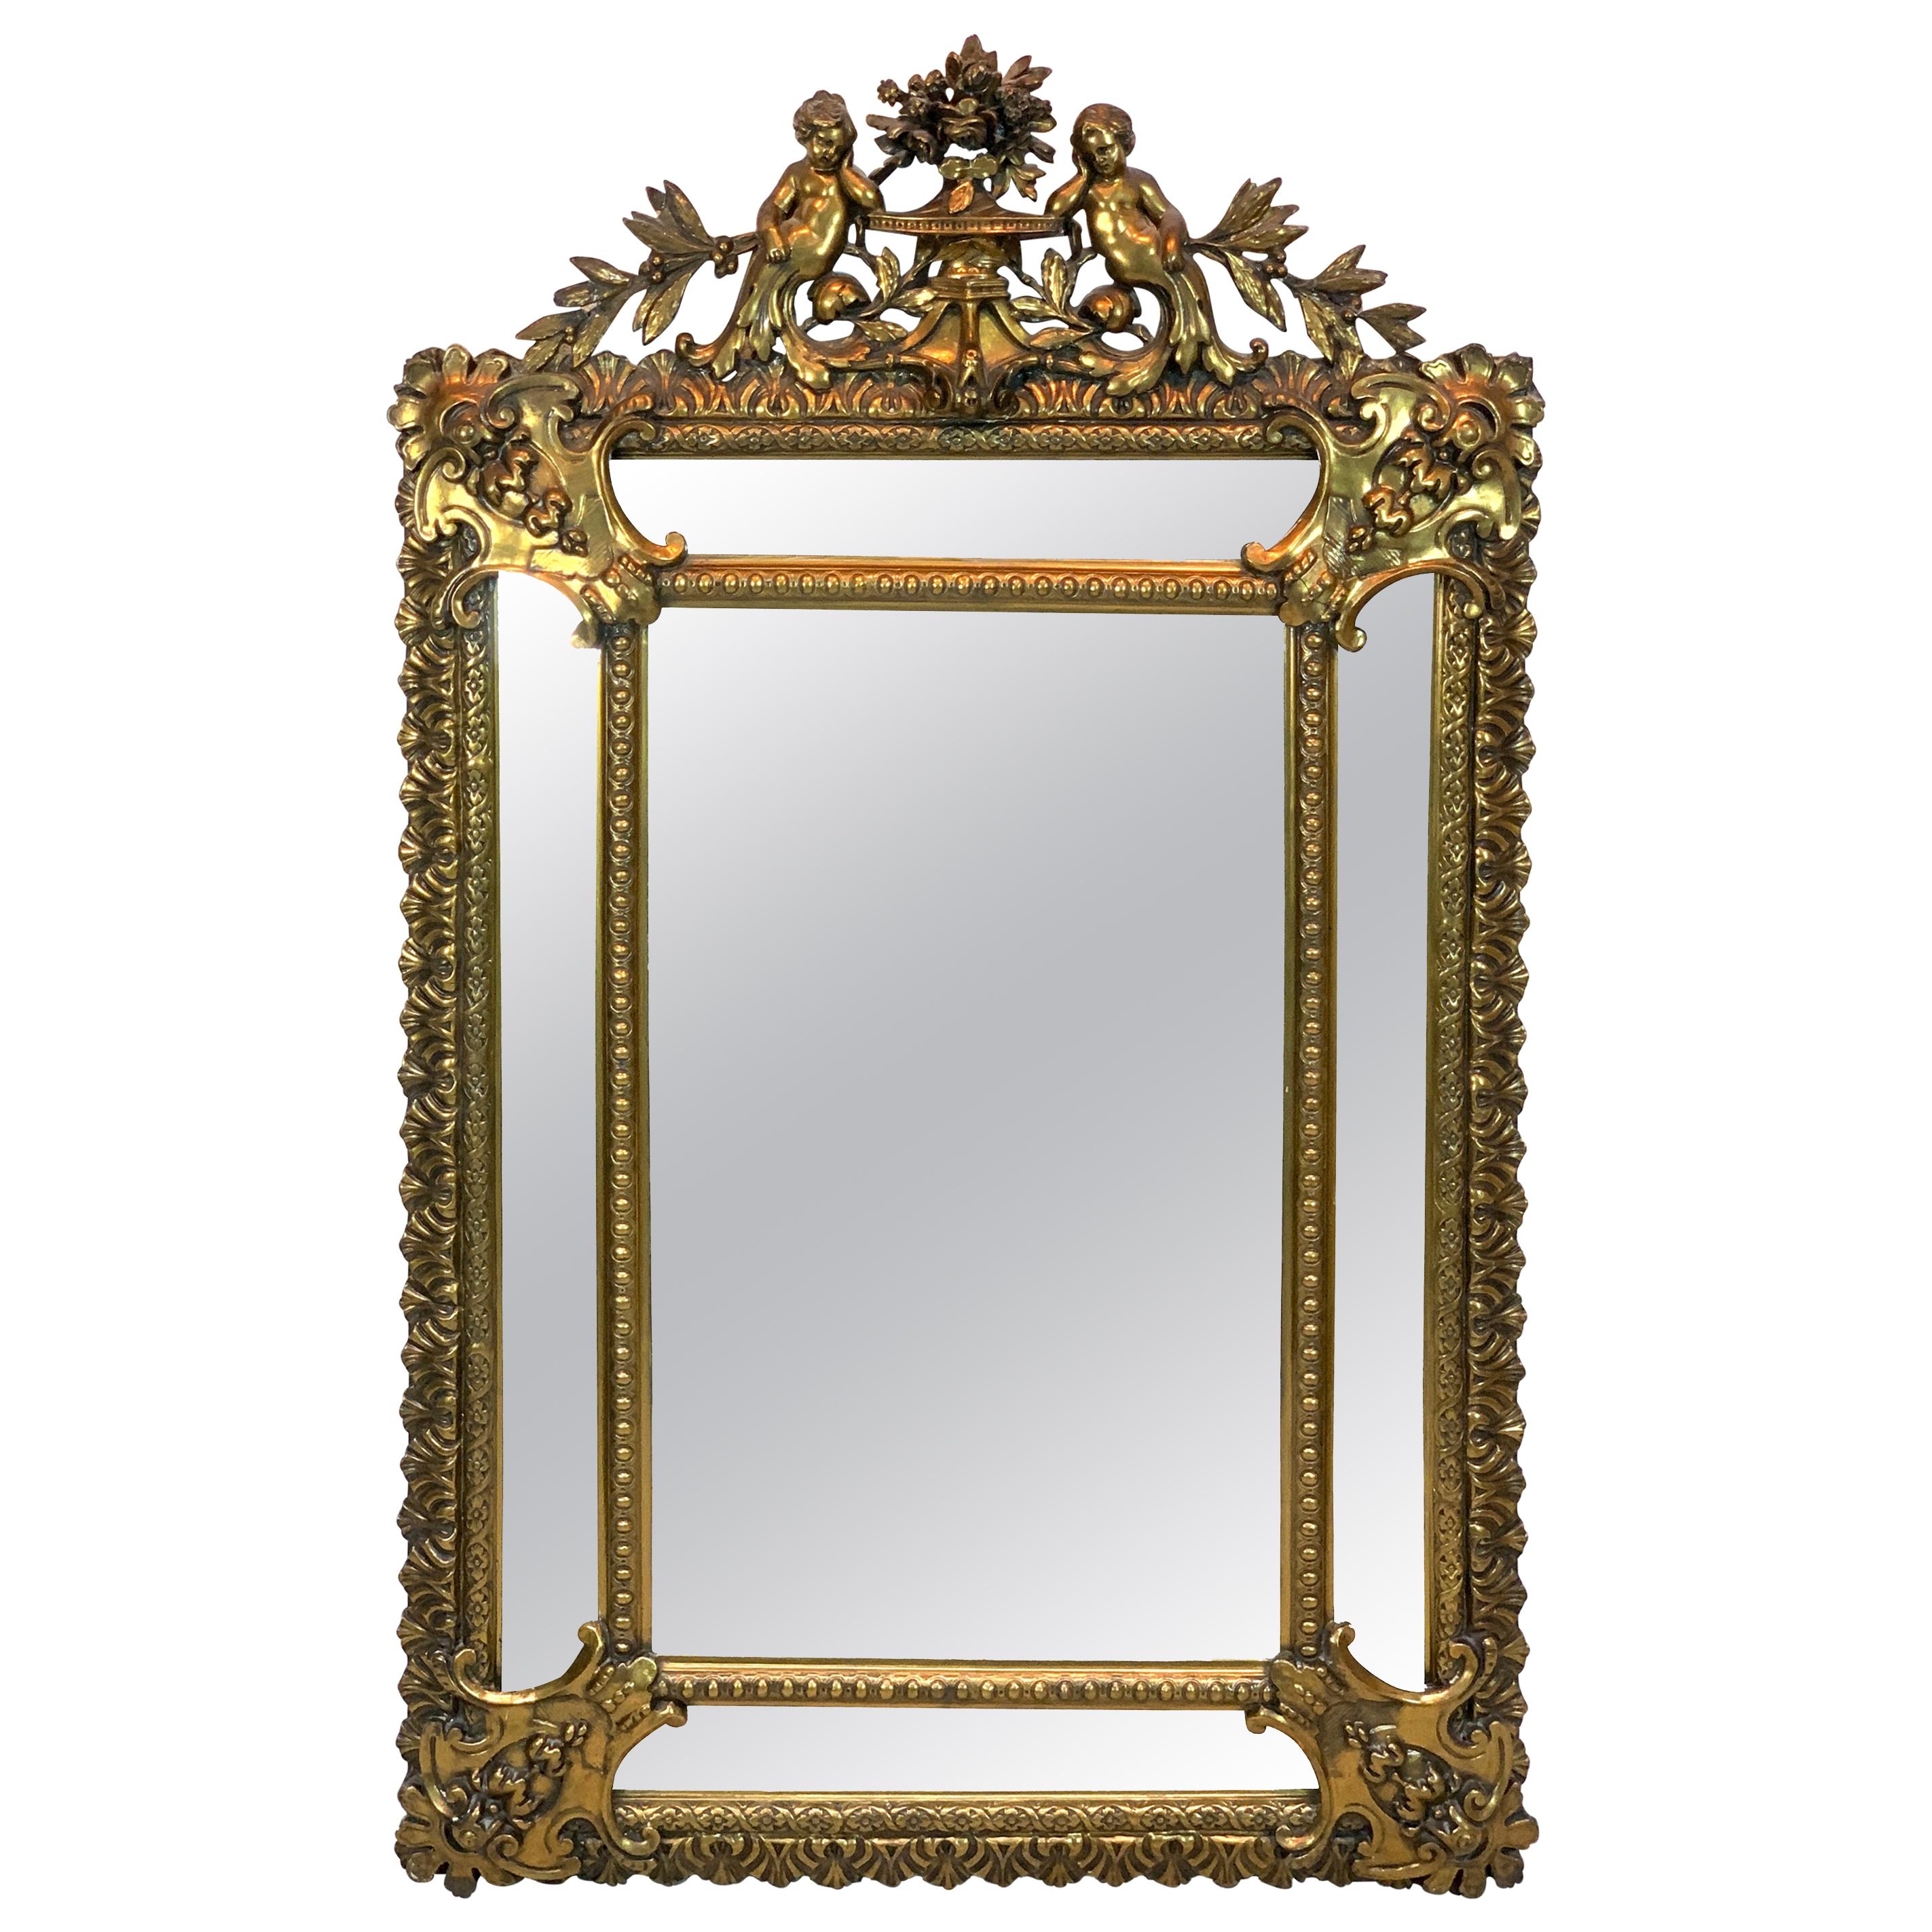 Exquisite French Carved Giltwood Putti Motif Cushioned Mirror, Paris, 1900